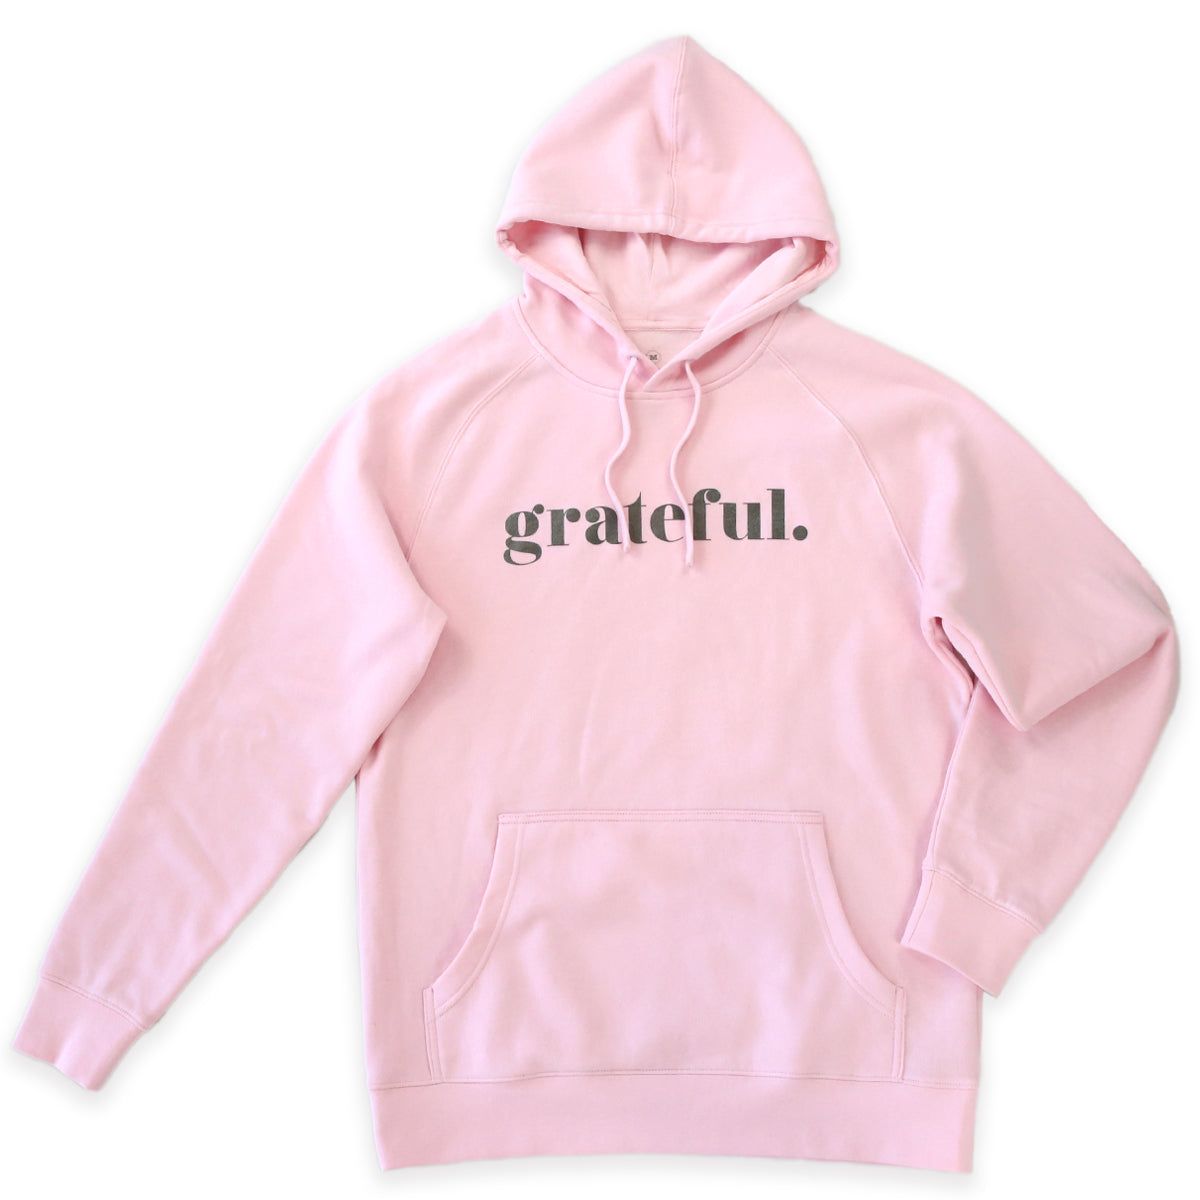 Grateful HOODIE - Pink with Charcoal Shimmer Print